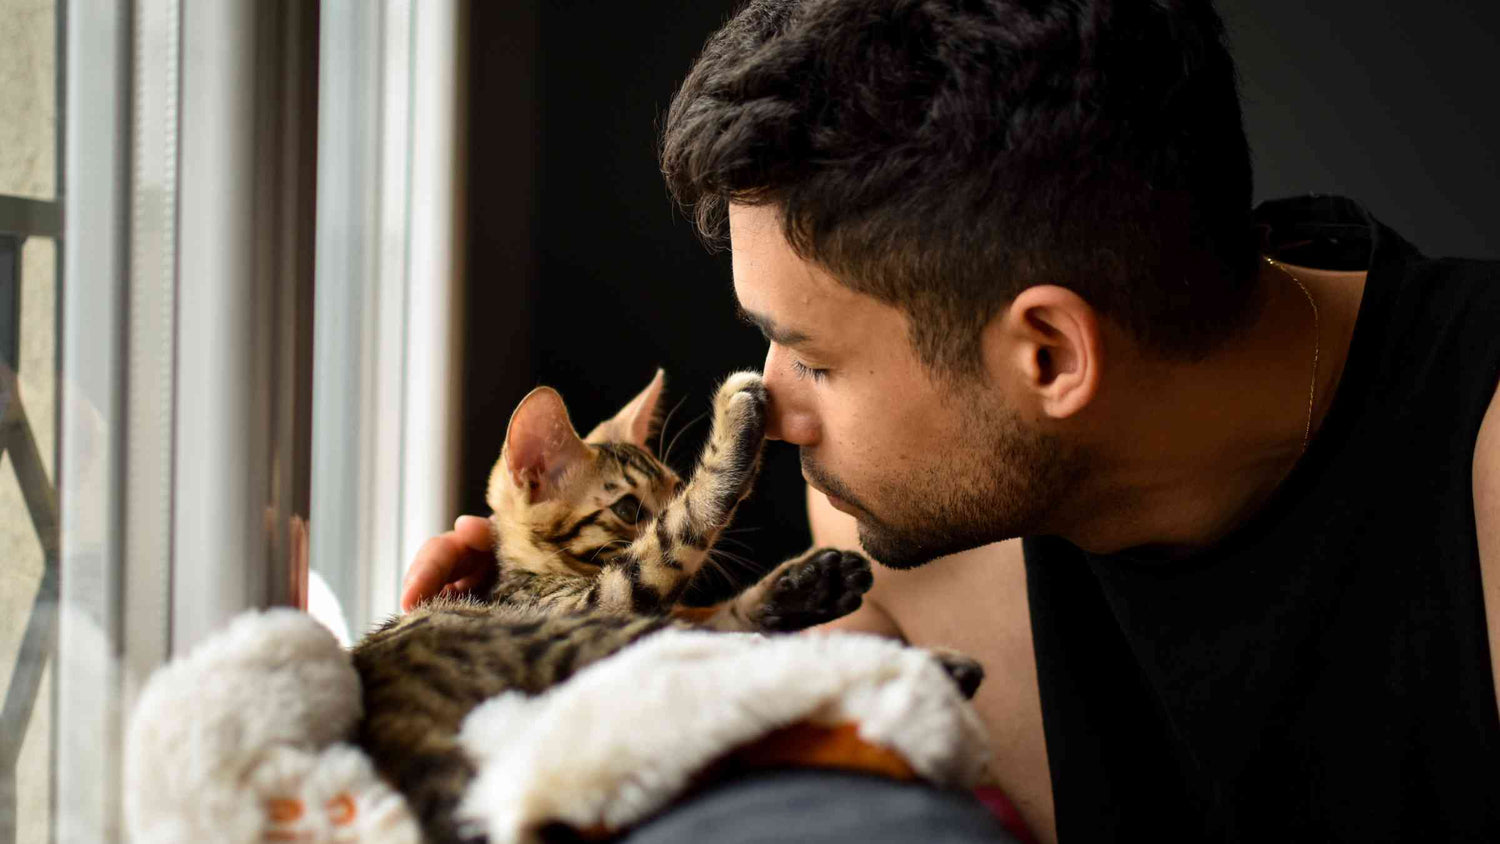 Open Your Home and Your Heart: Why You Should Foster Cats - Young man with dark hair kissing a small kitten